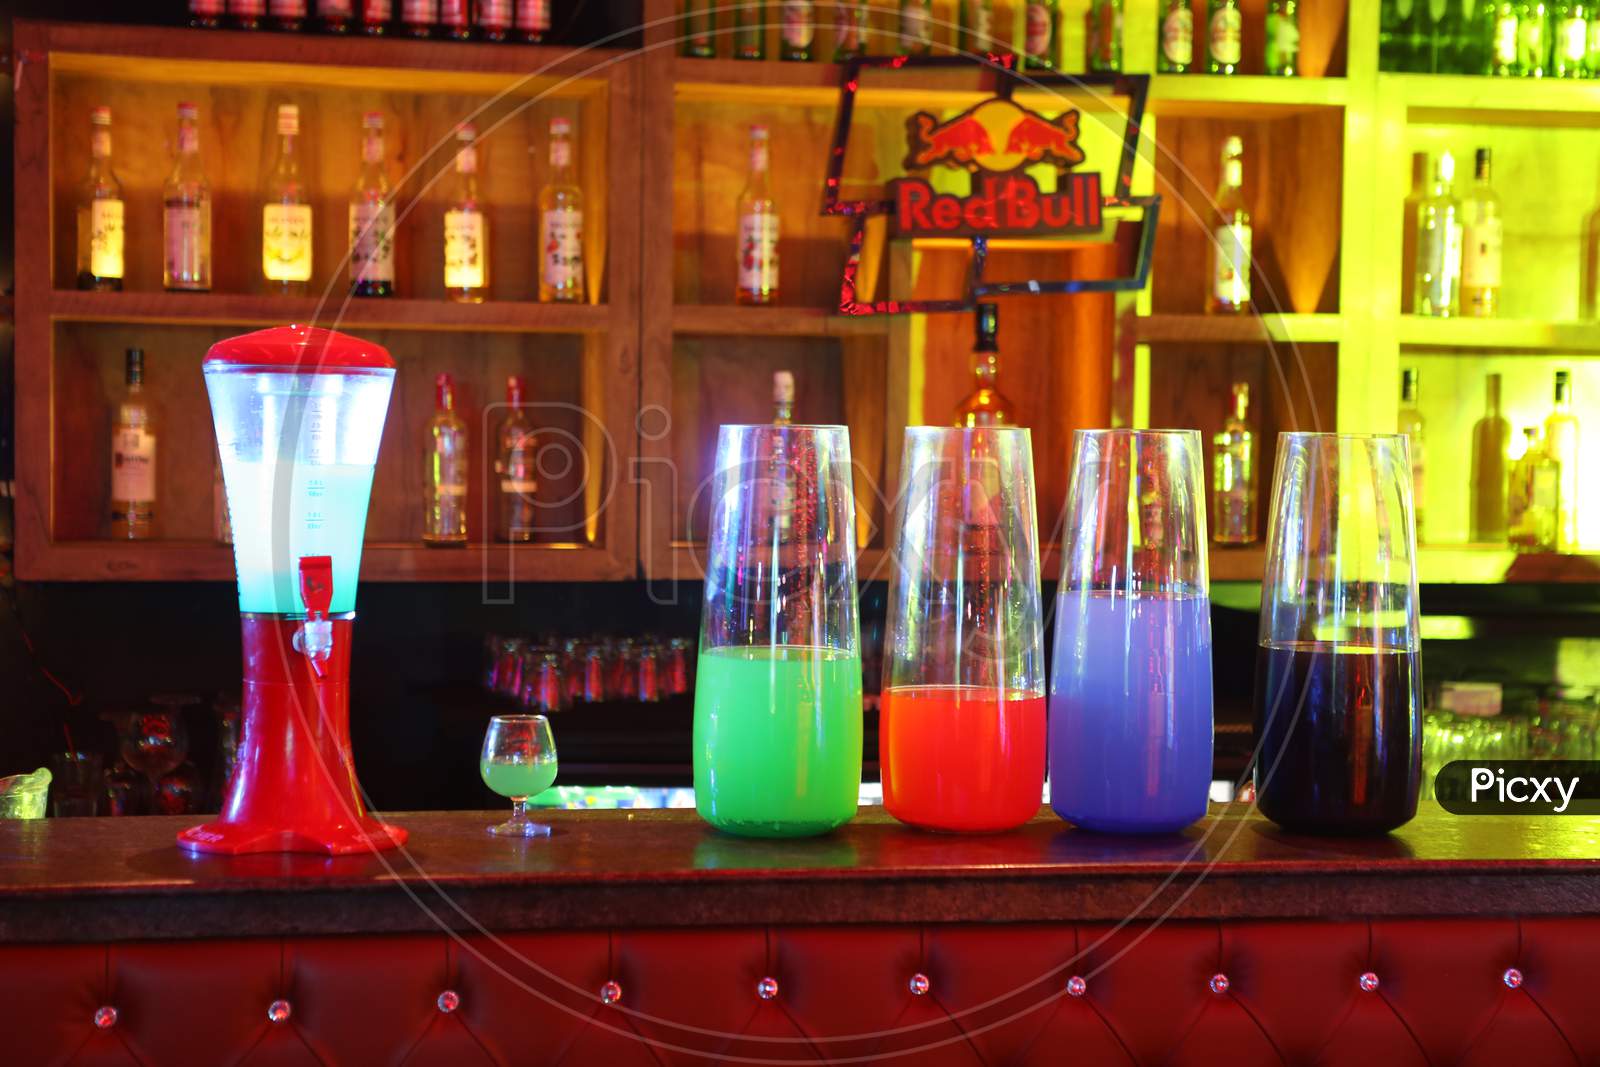 Bar Counter With Wine Bottles Or Alcohol Bottles